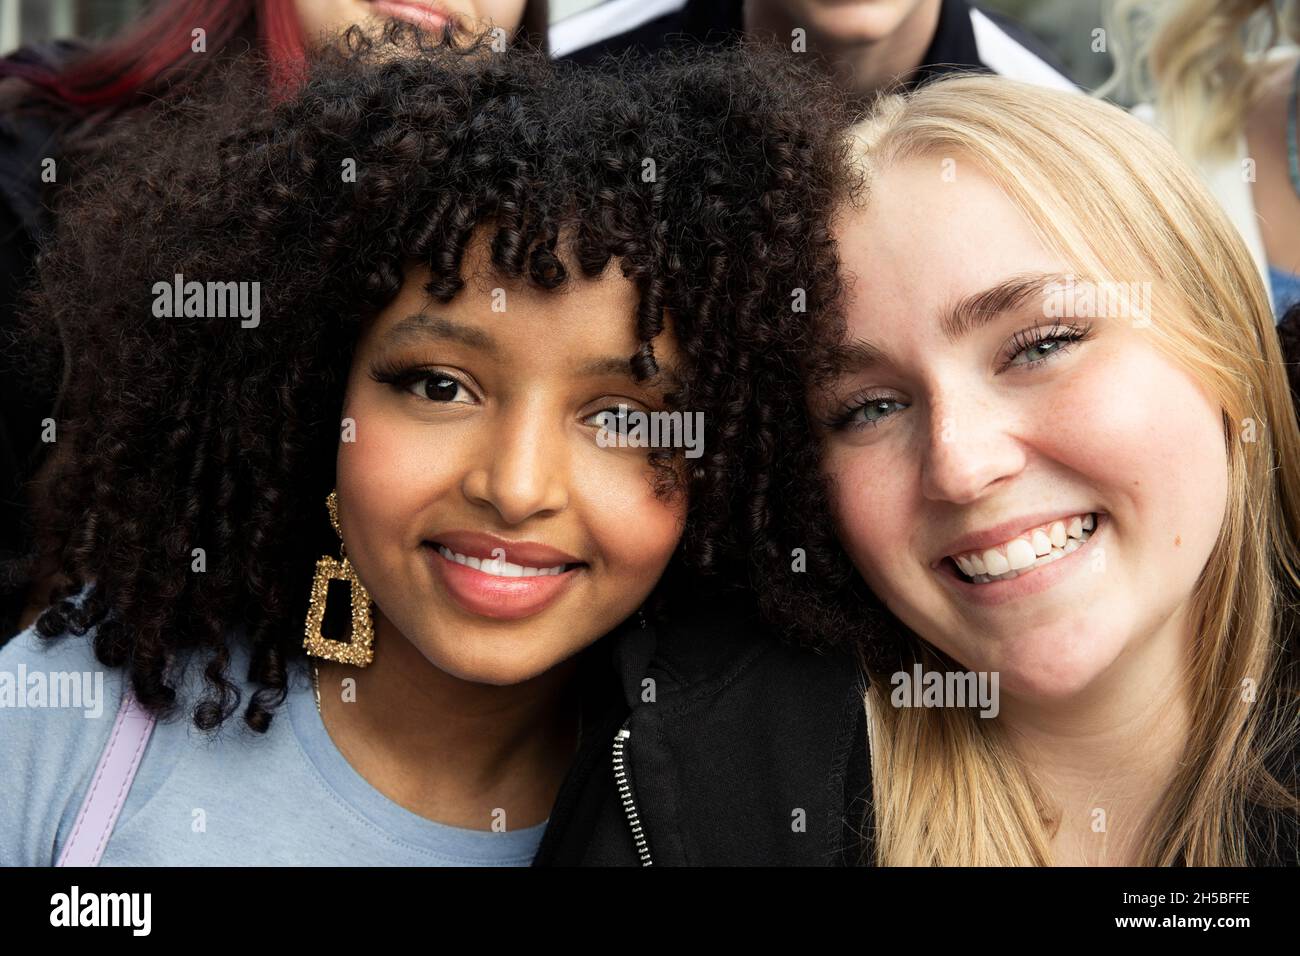 Portrait of smiling female friends together Stock Photo